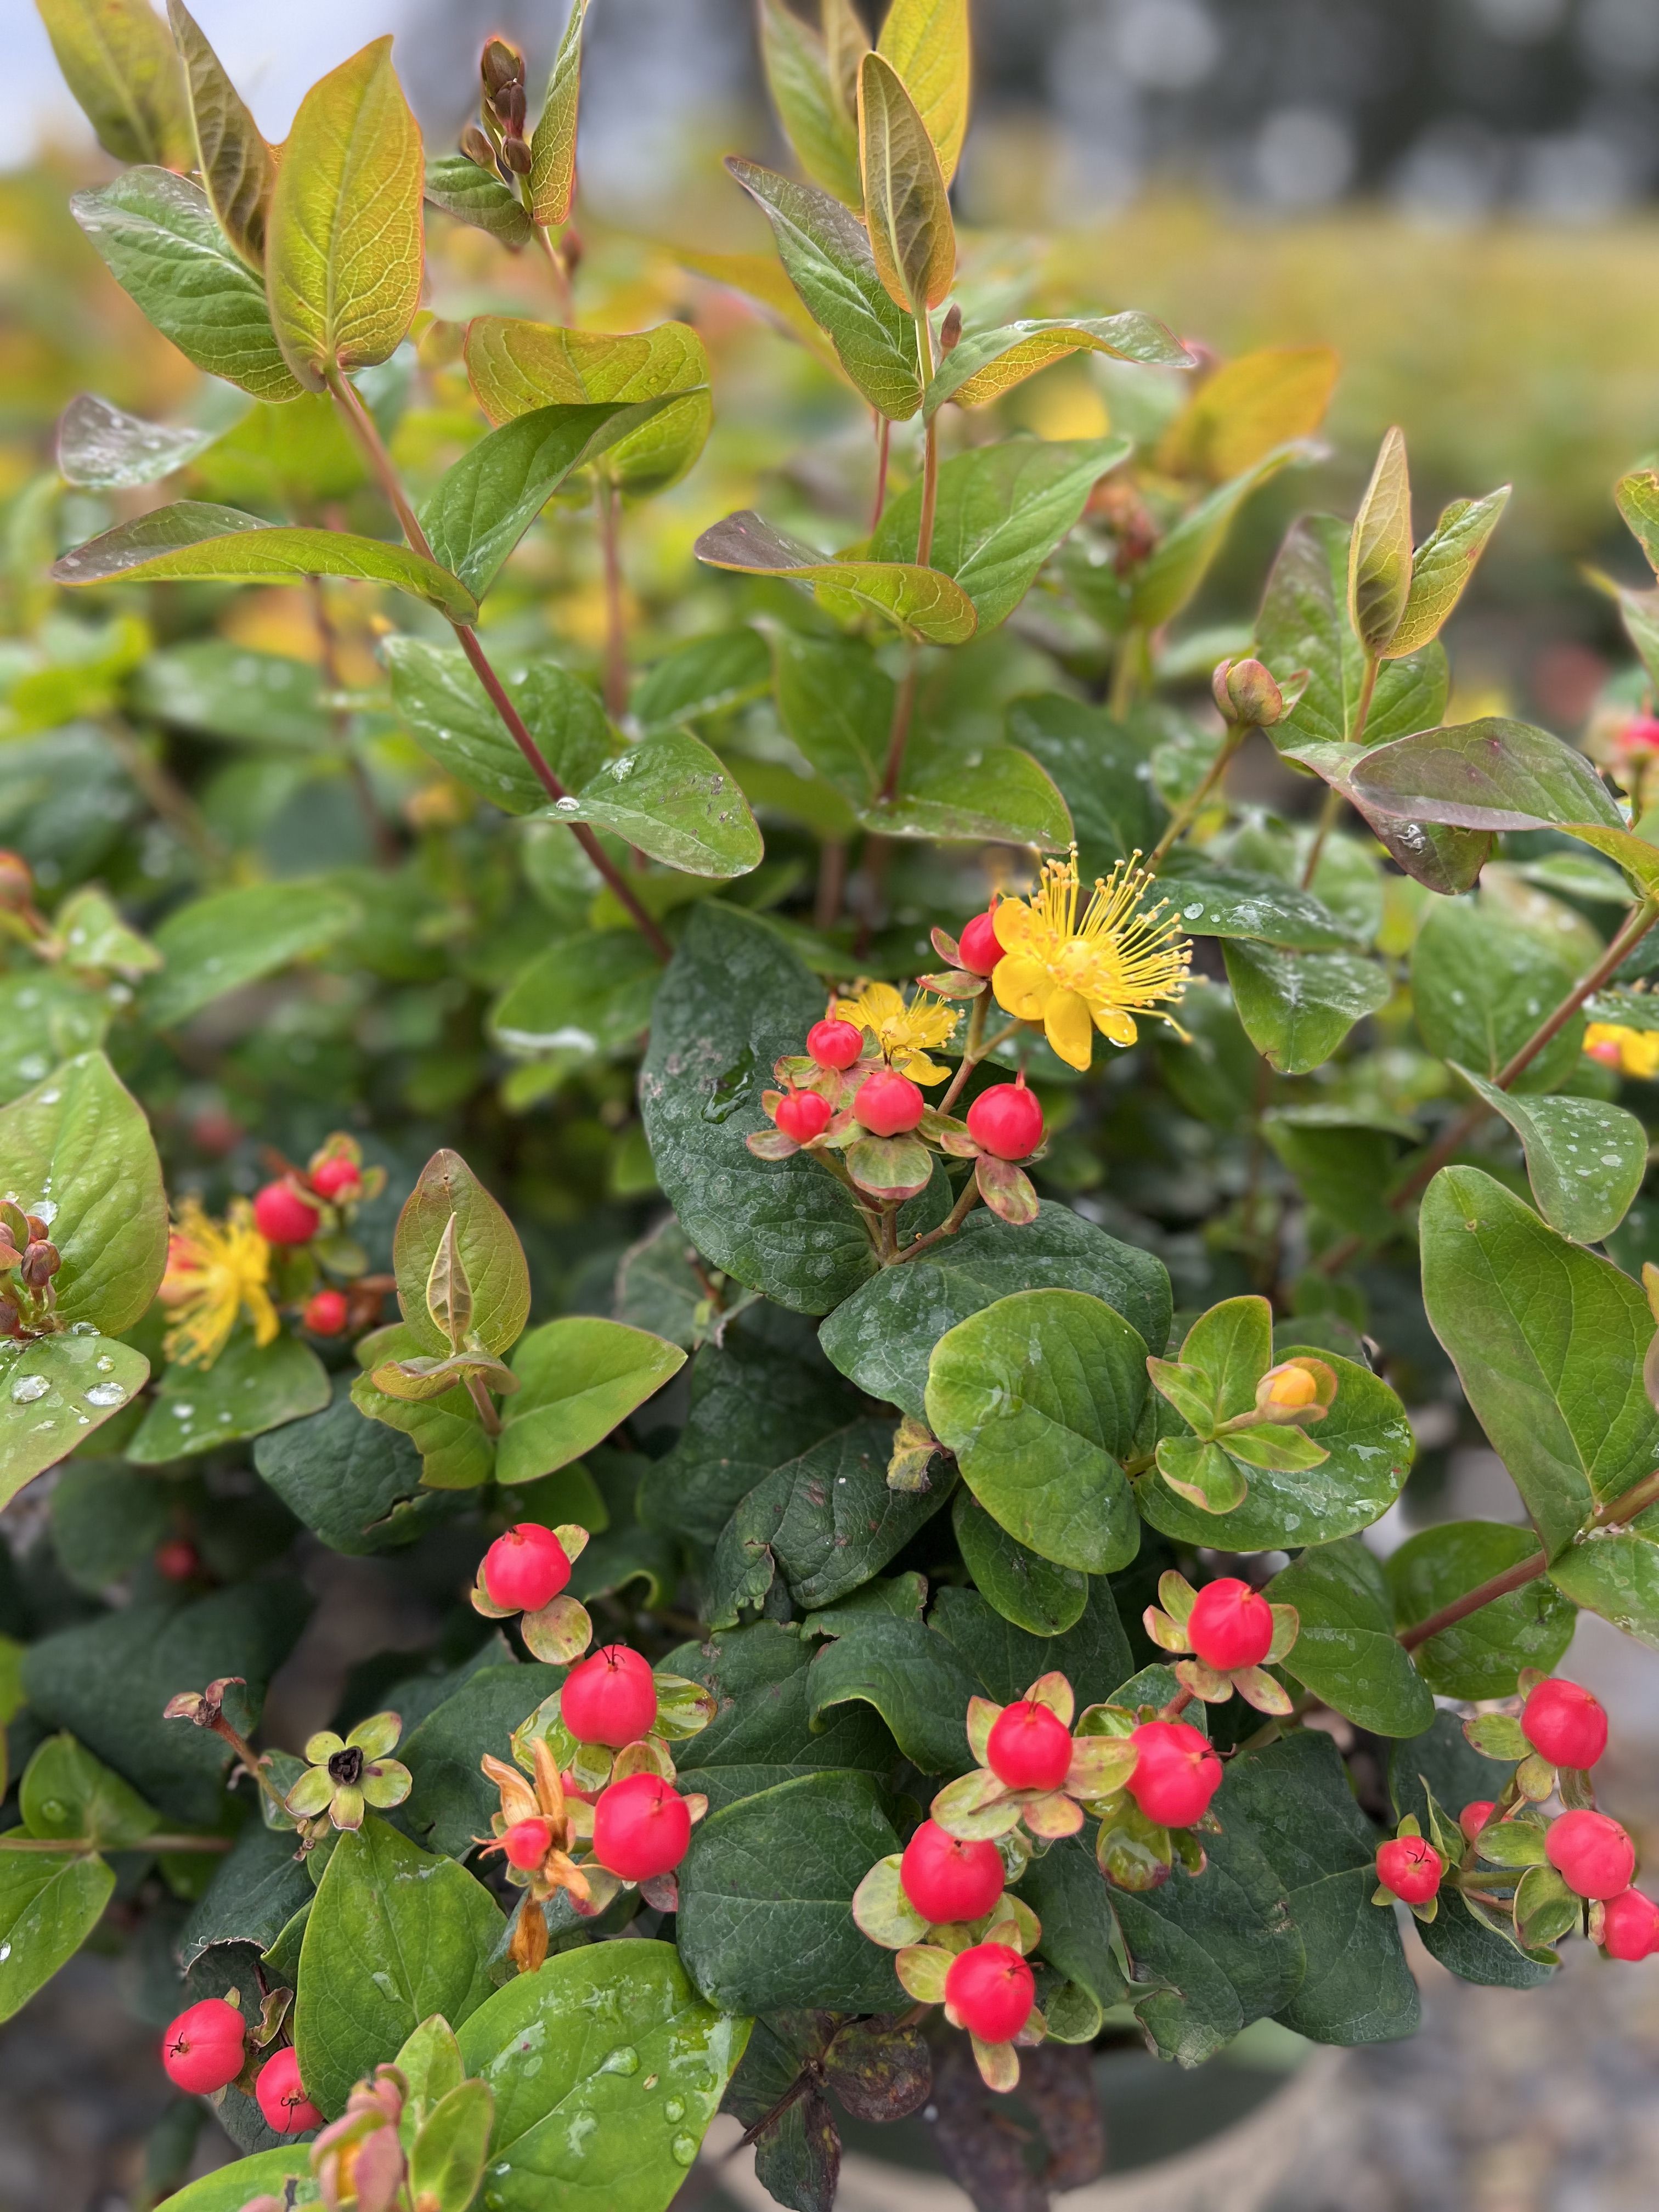 images/plants/hypericum/hyp-floralberry-rose/hyp-floralberry-rose-0008.jpg